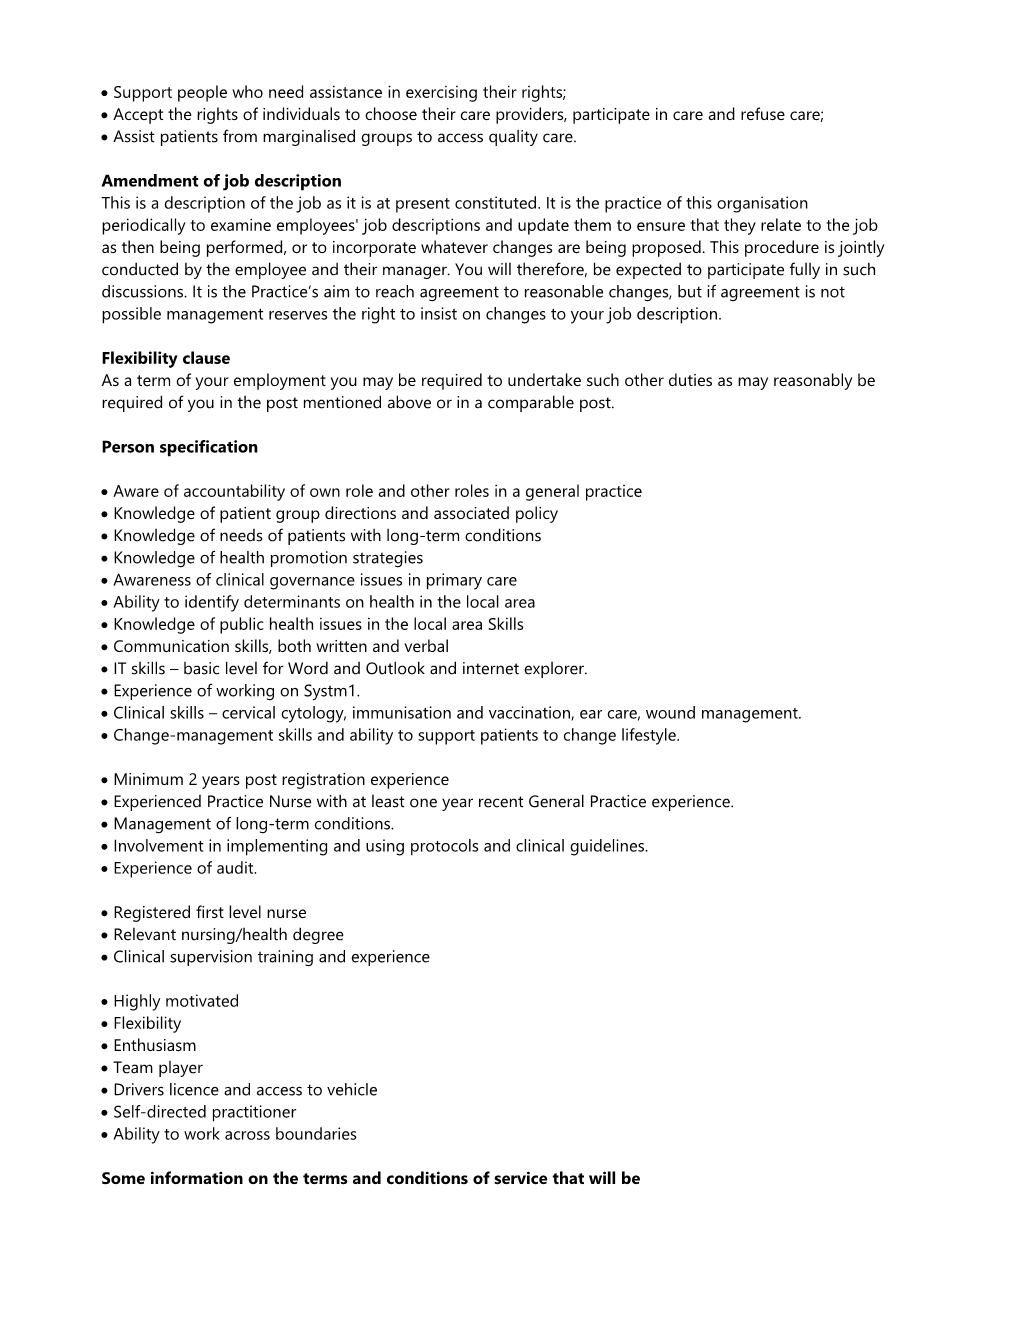 Job Description for the Post of Practice Nurse - Band 5 Or 6 (Equivalent)